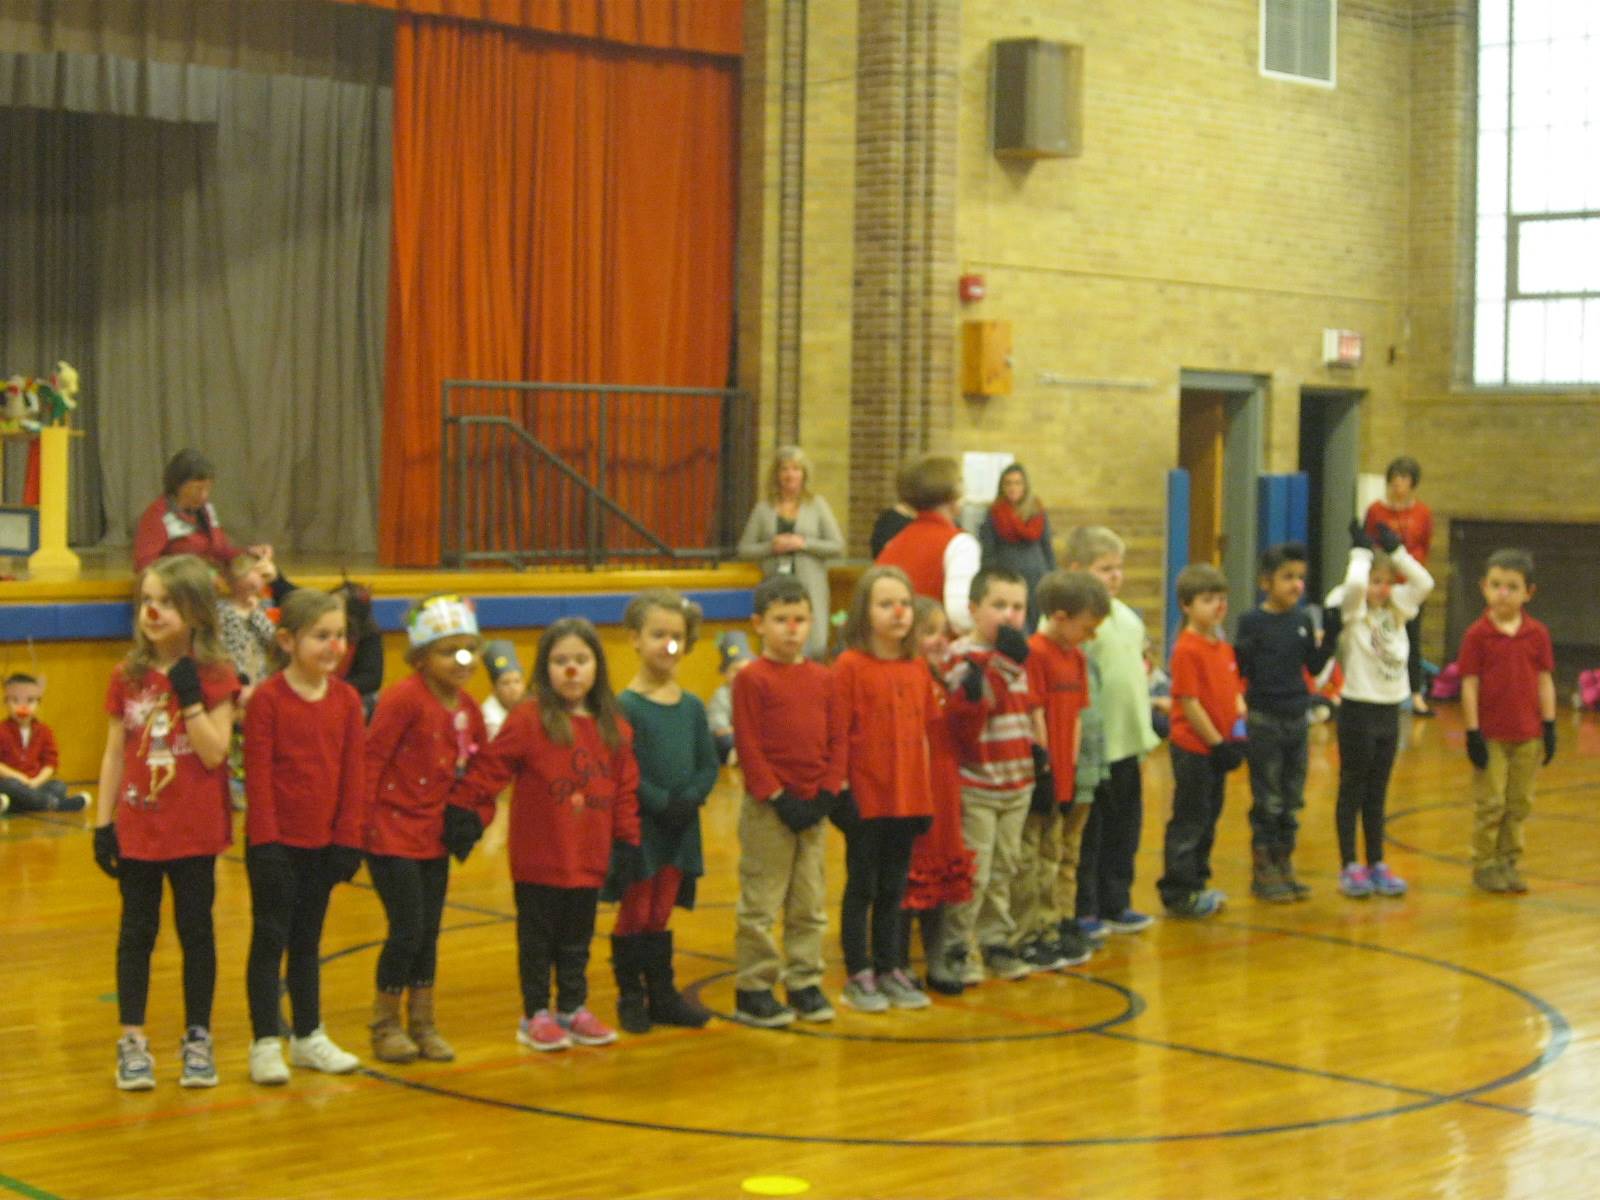 Students sing and dance the reindeer hokey pokey.